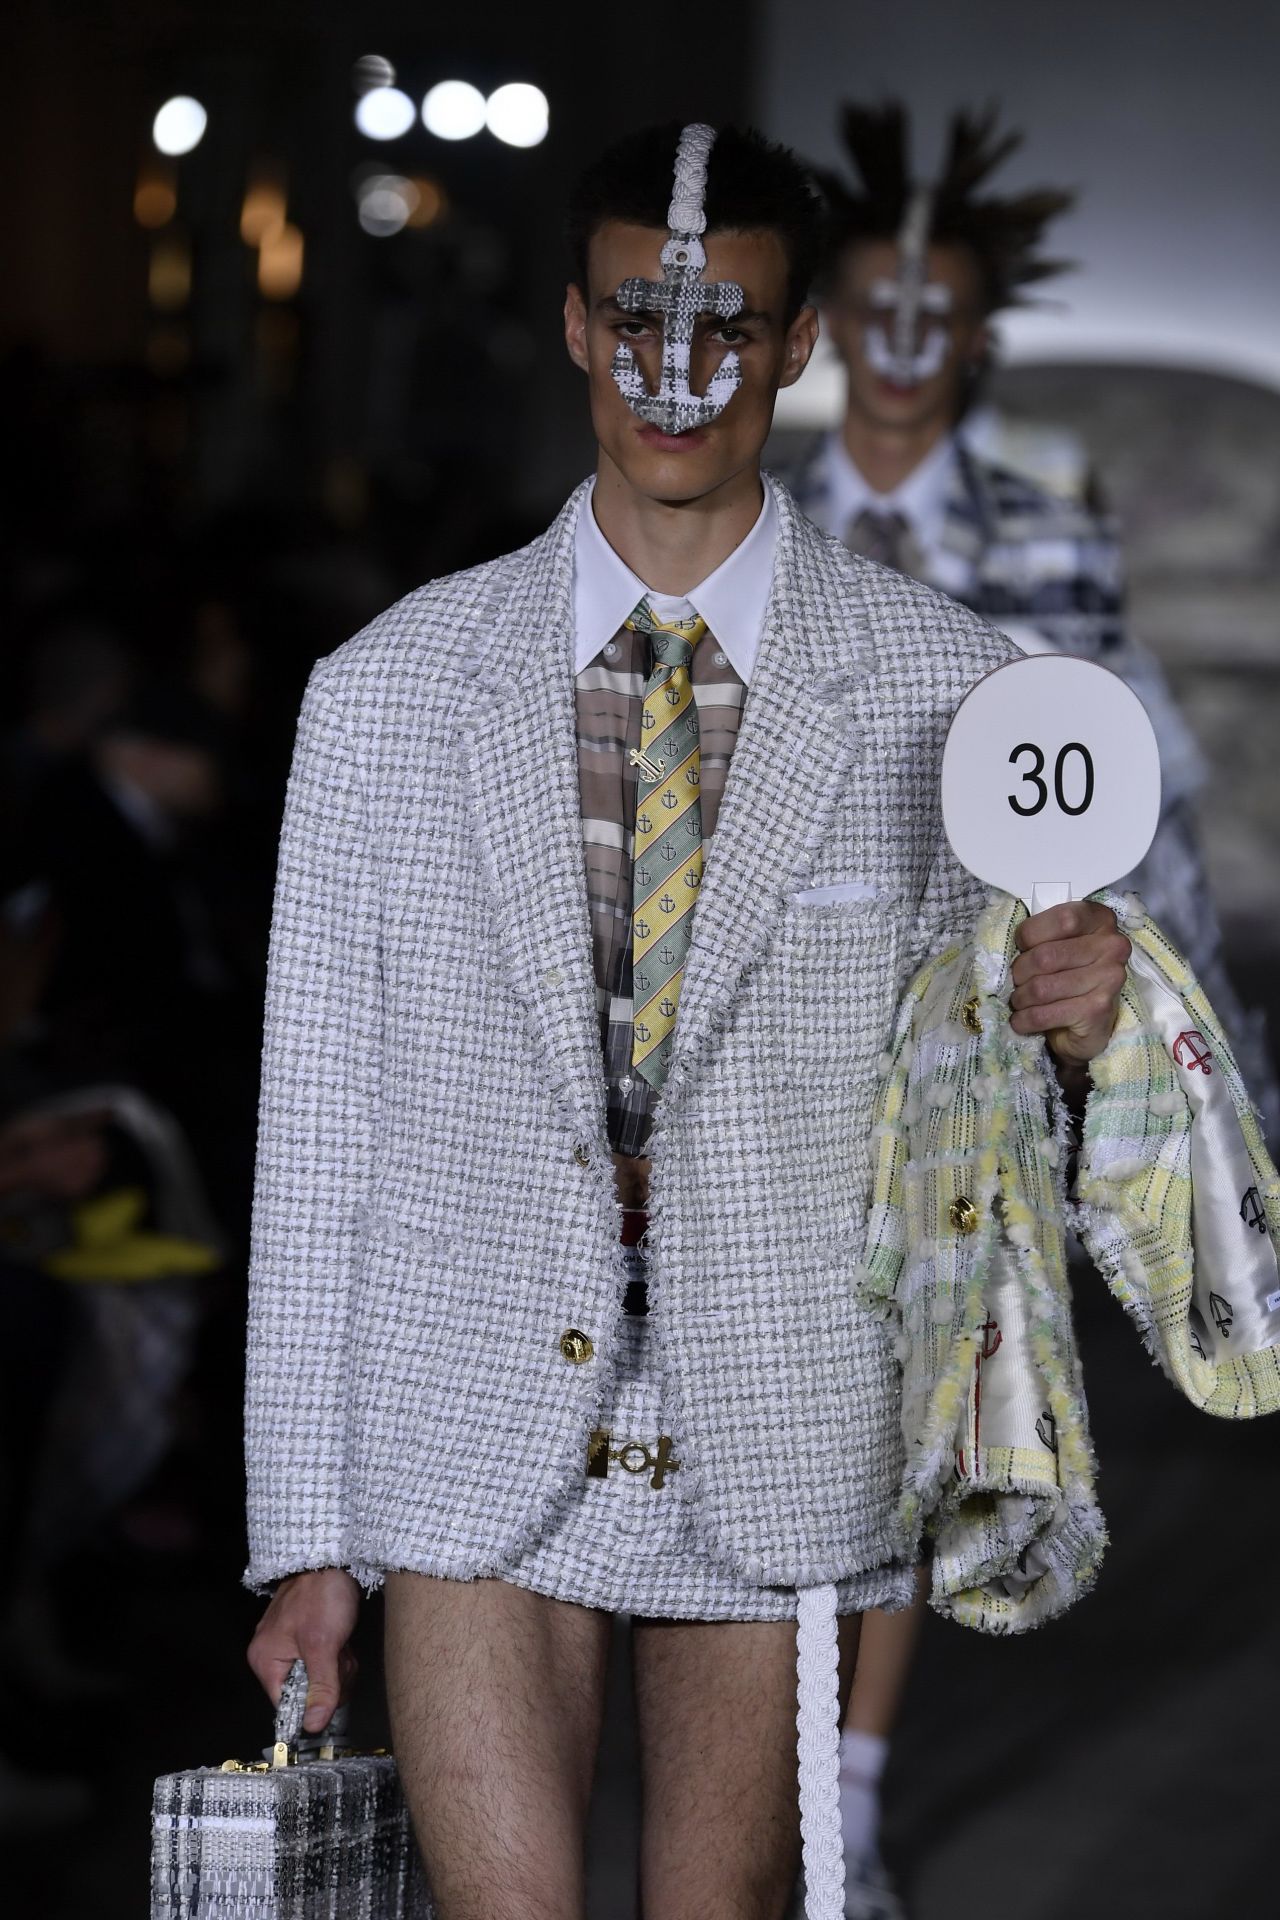 A male model wears a miniskirt on the runway during designer Thom Browne's Ready to Wear Spring-Summer 2023 fashion show.